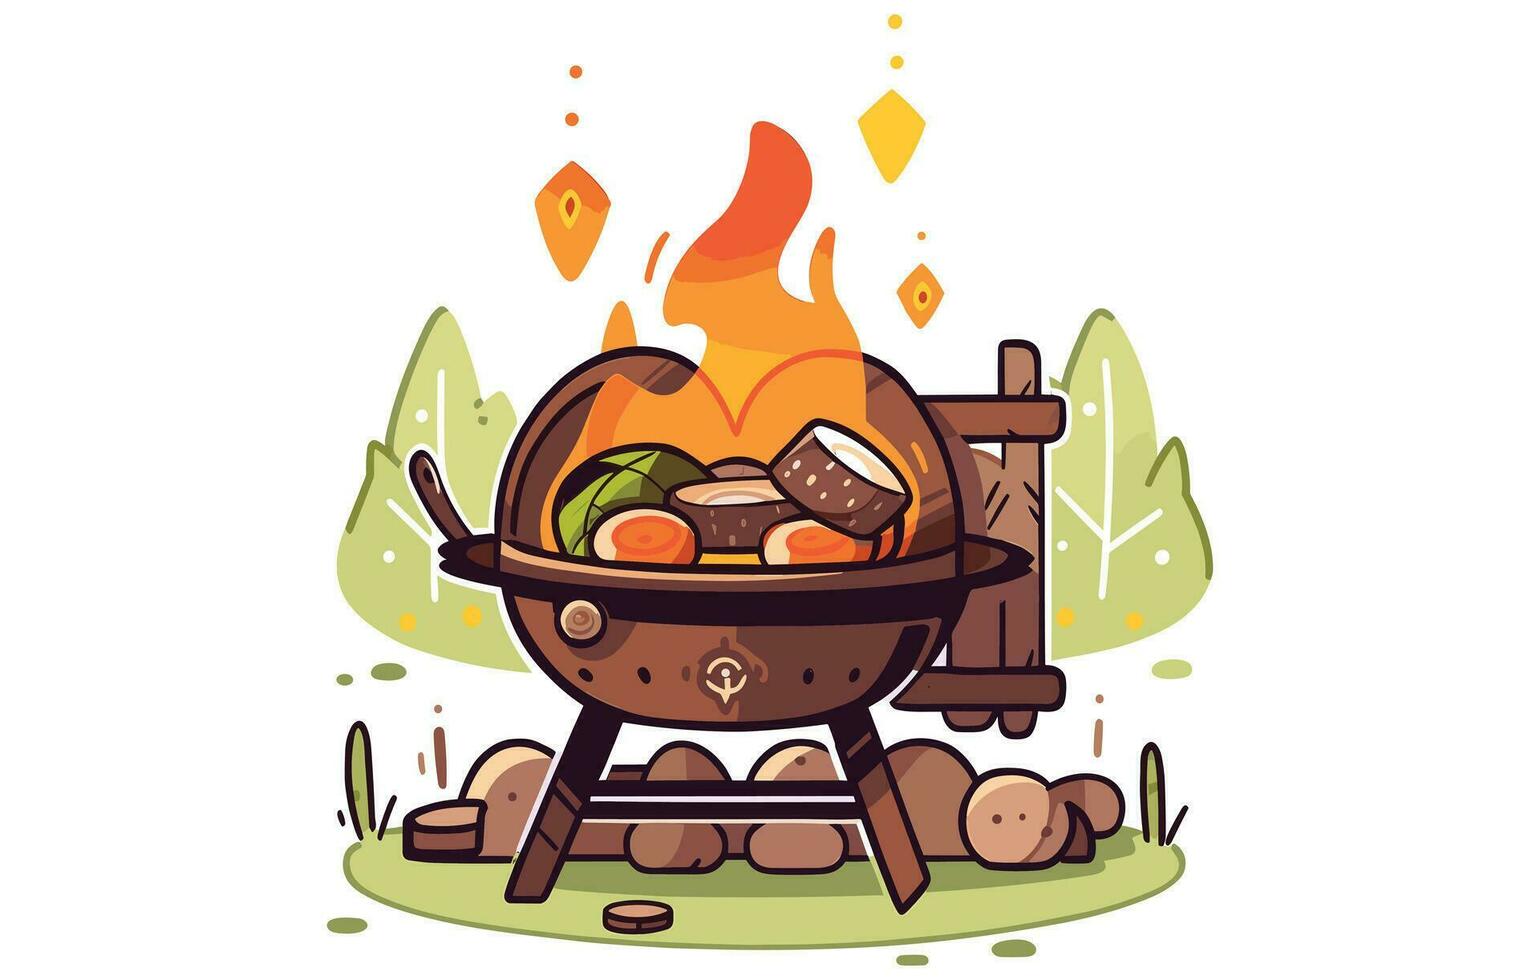 River cooking grill with camfire flat vector icon,Illustration design of a Grilling chicken over bonfire.